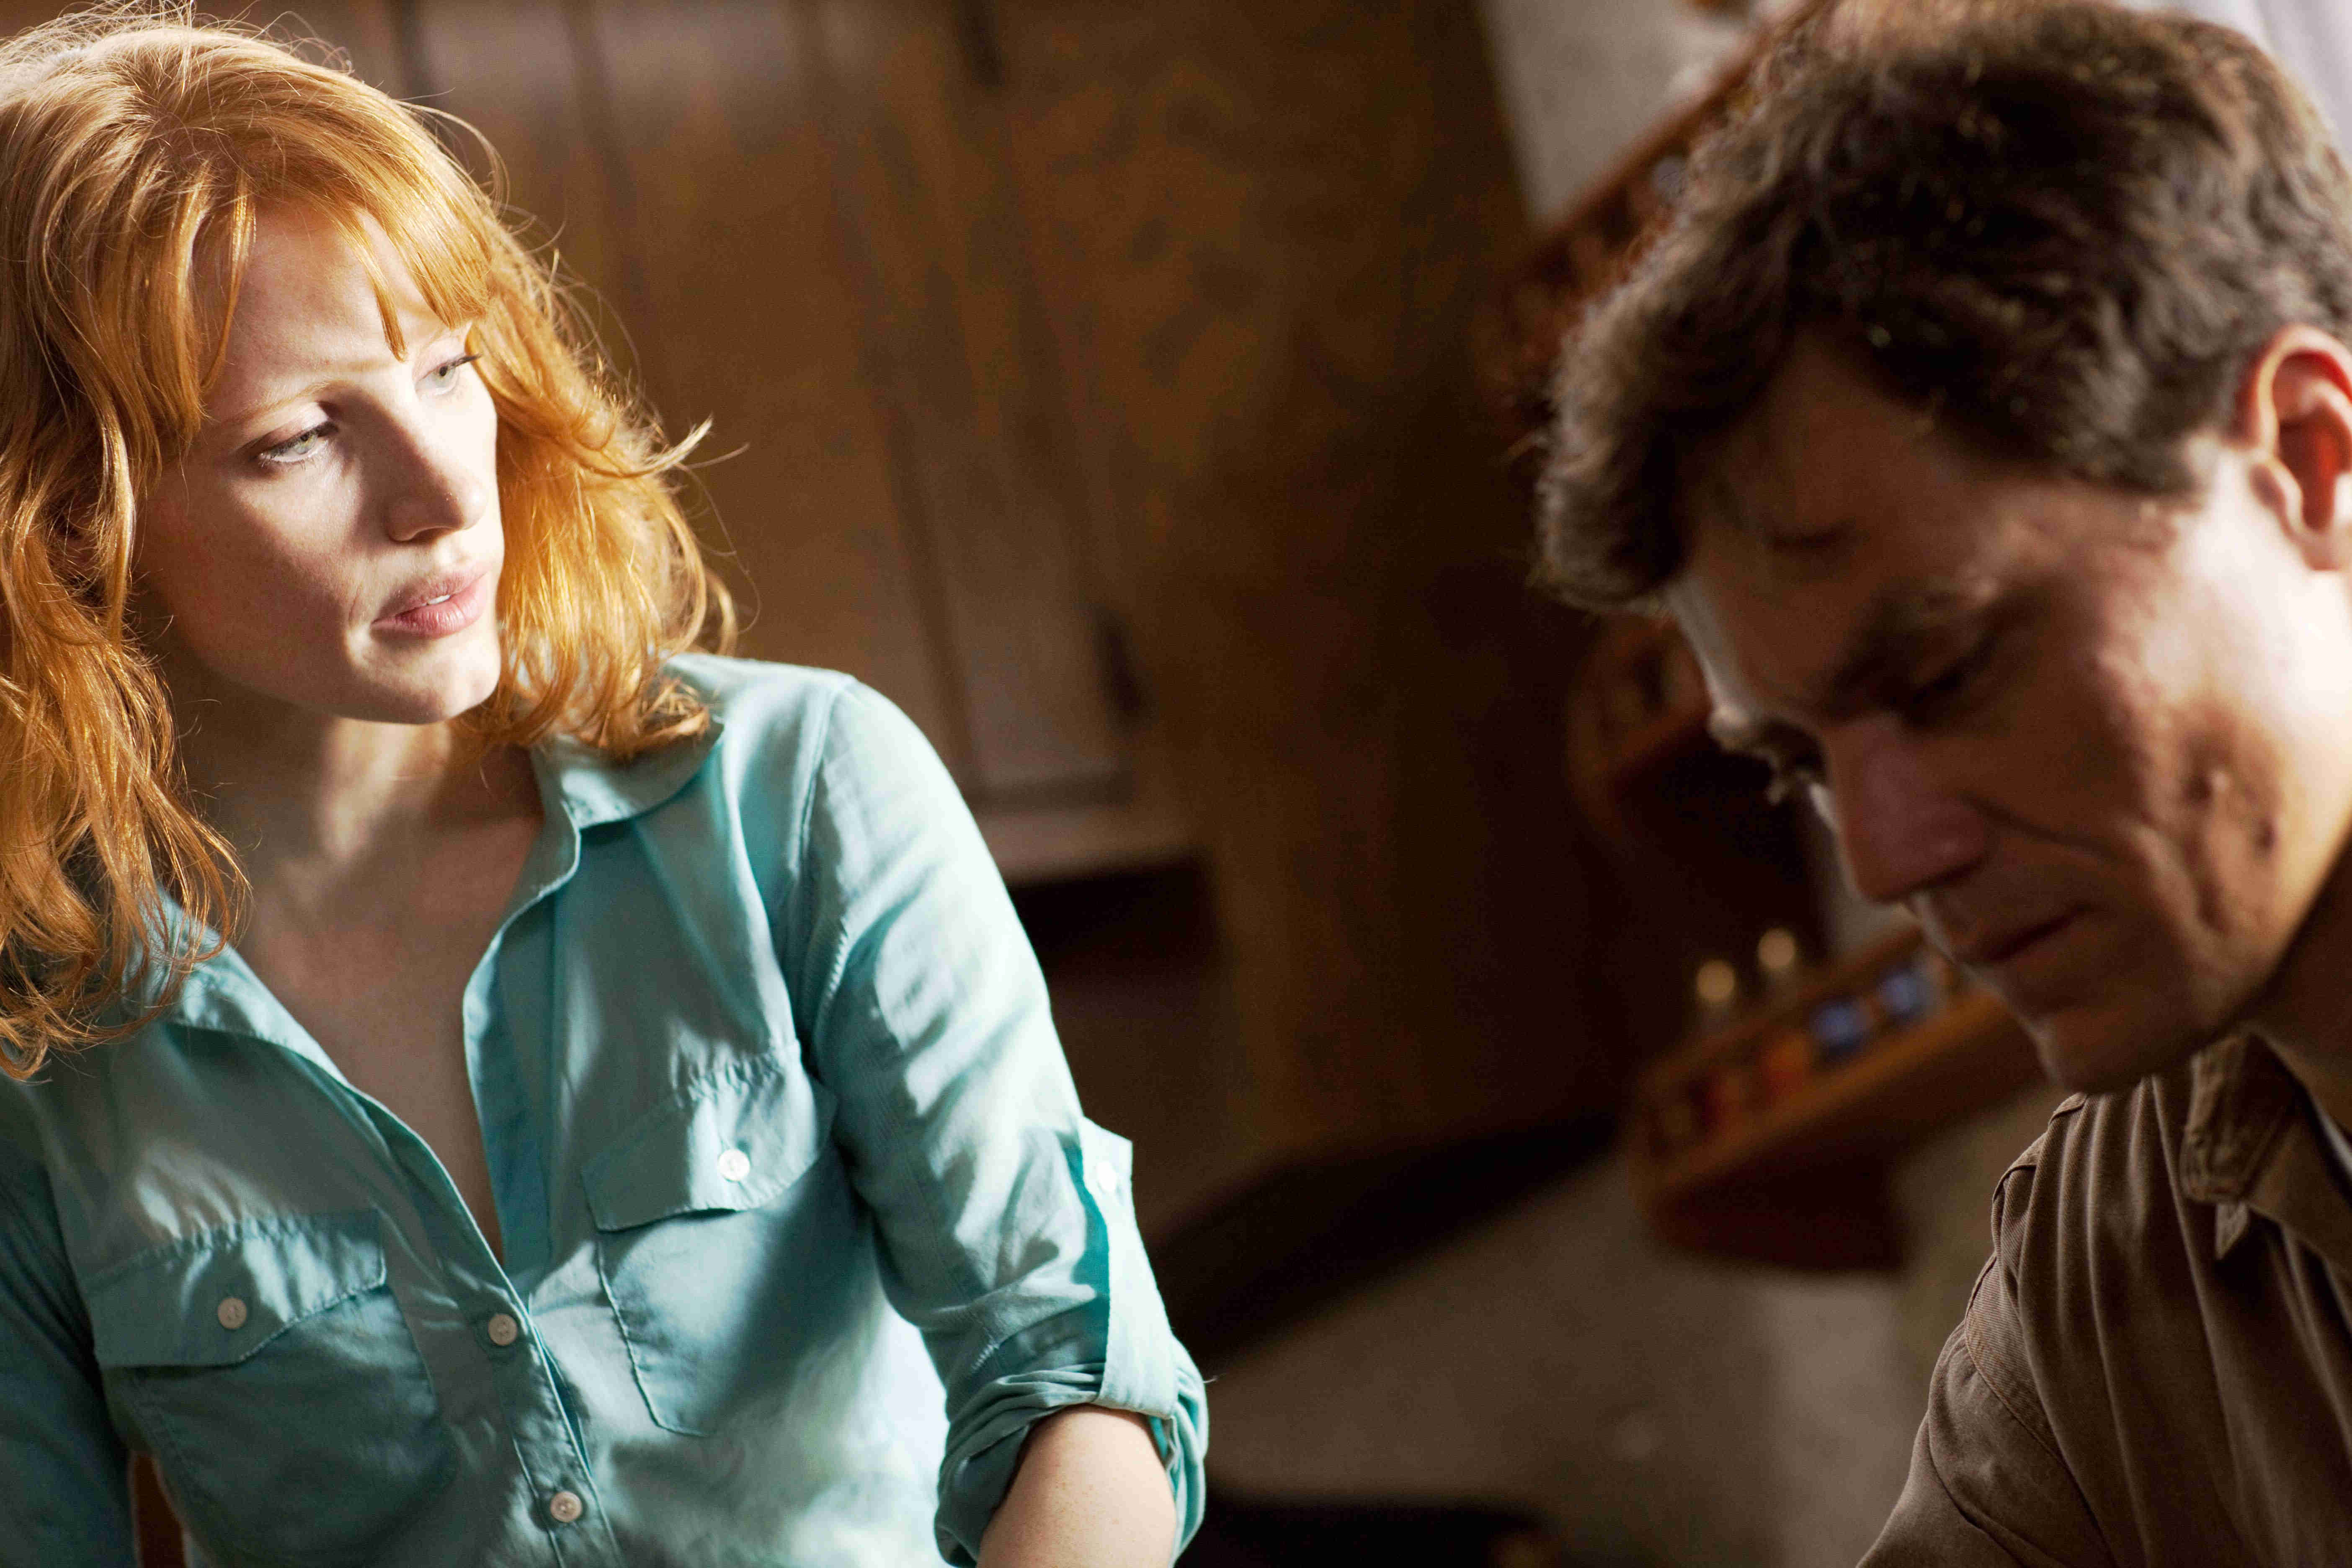 Jessica Chastain stars as Samantha LaForche and Michael Shannon stars as Curtis LaForche in Sony Pictures Classics' Take Shelter (2011)